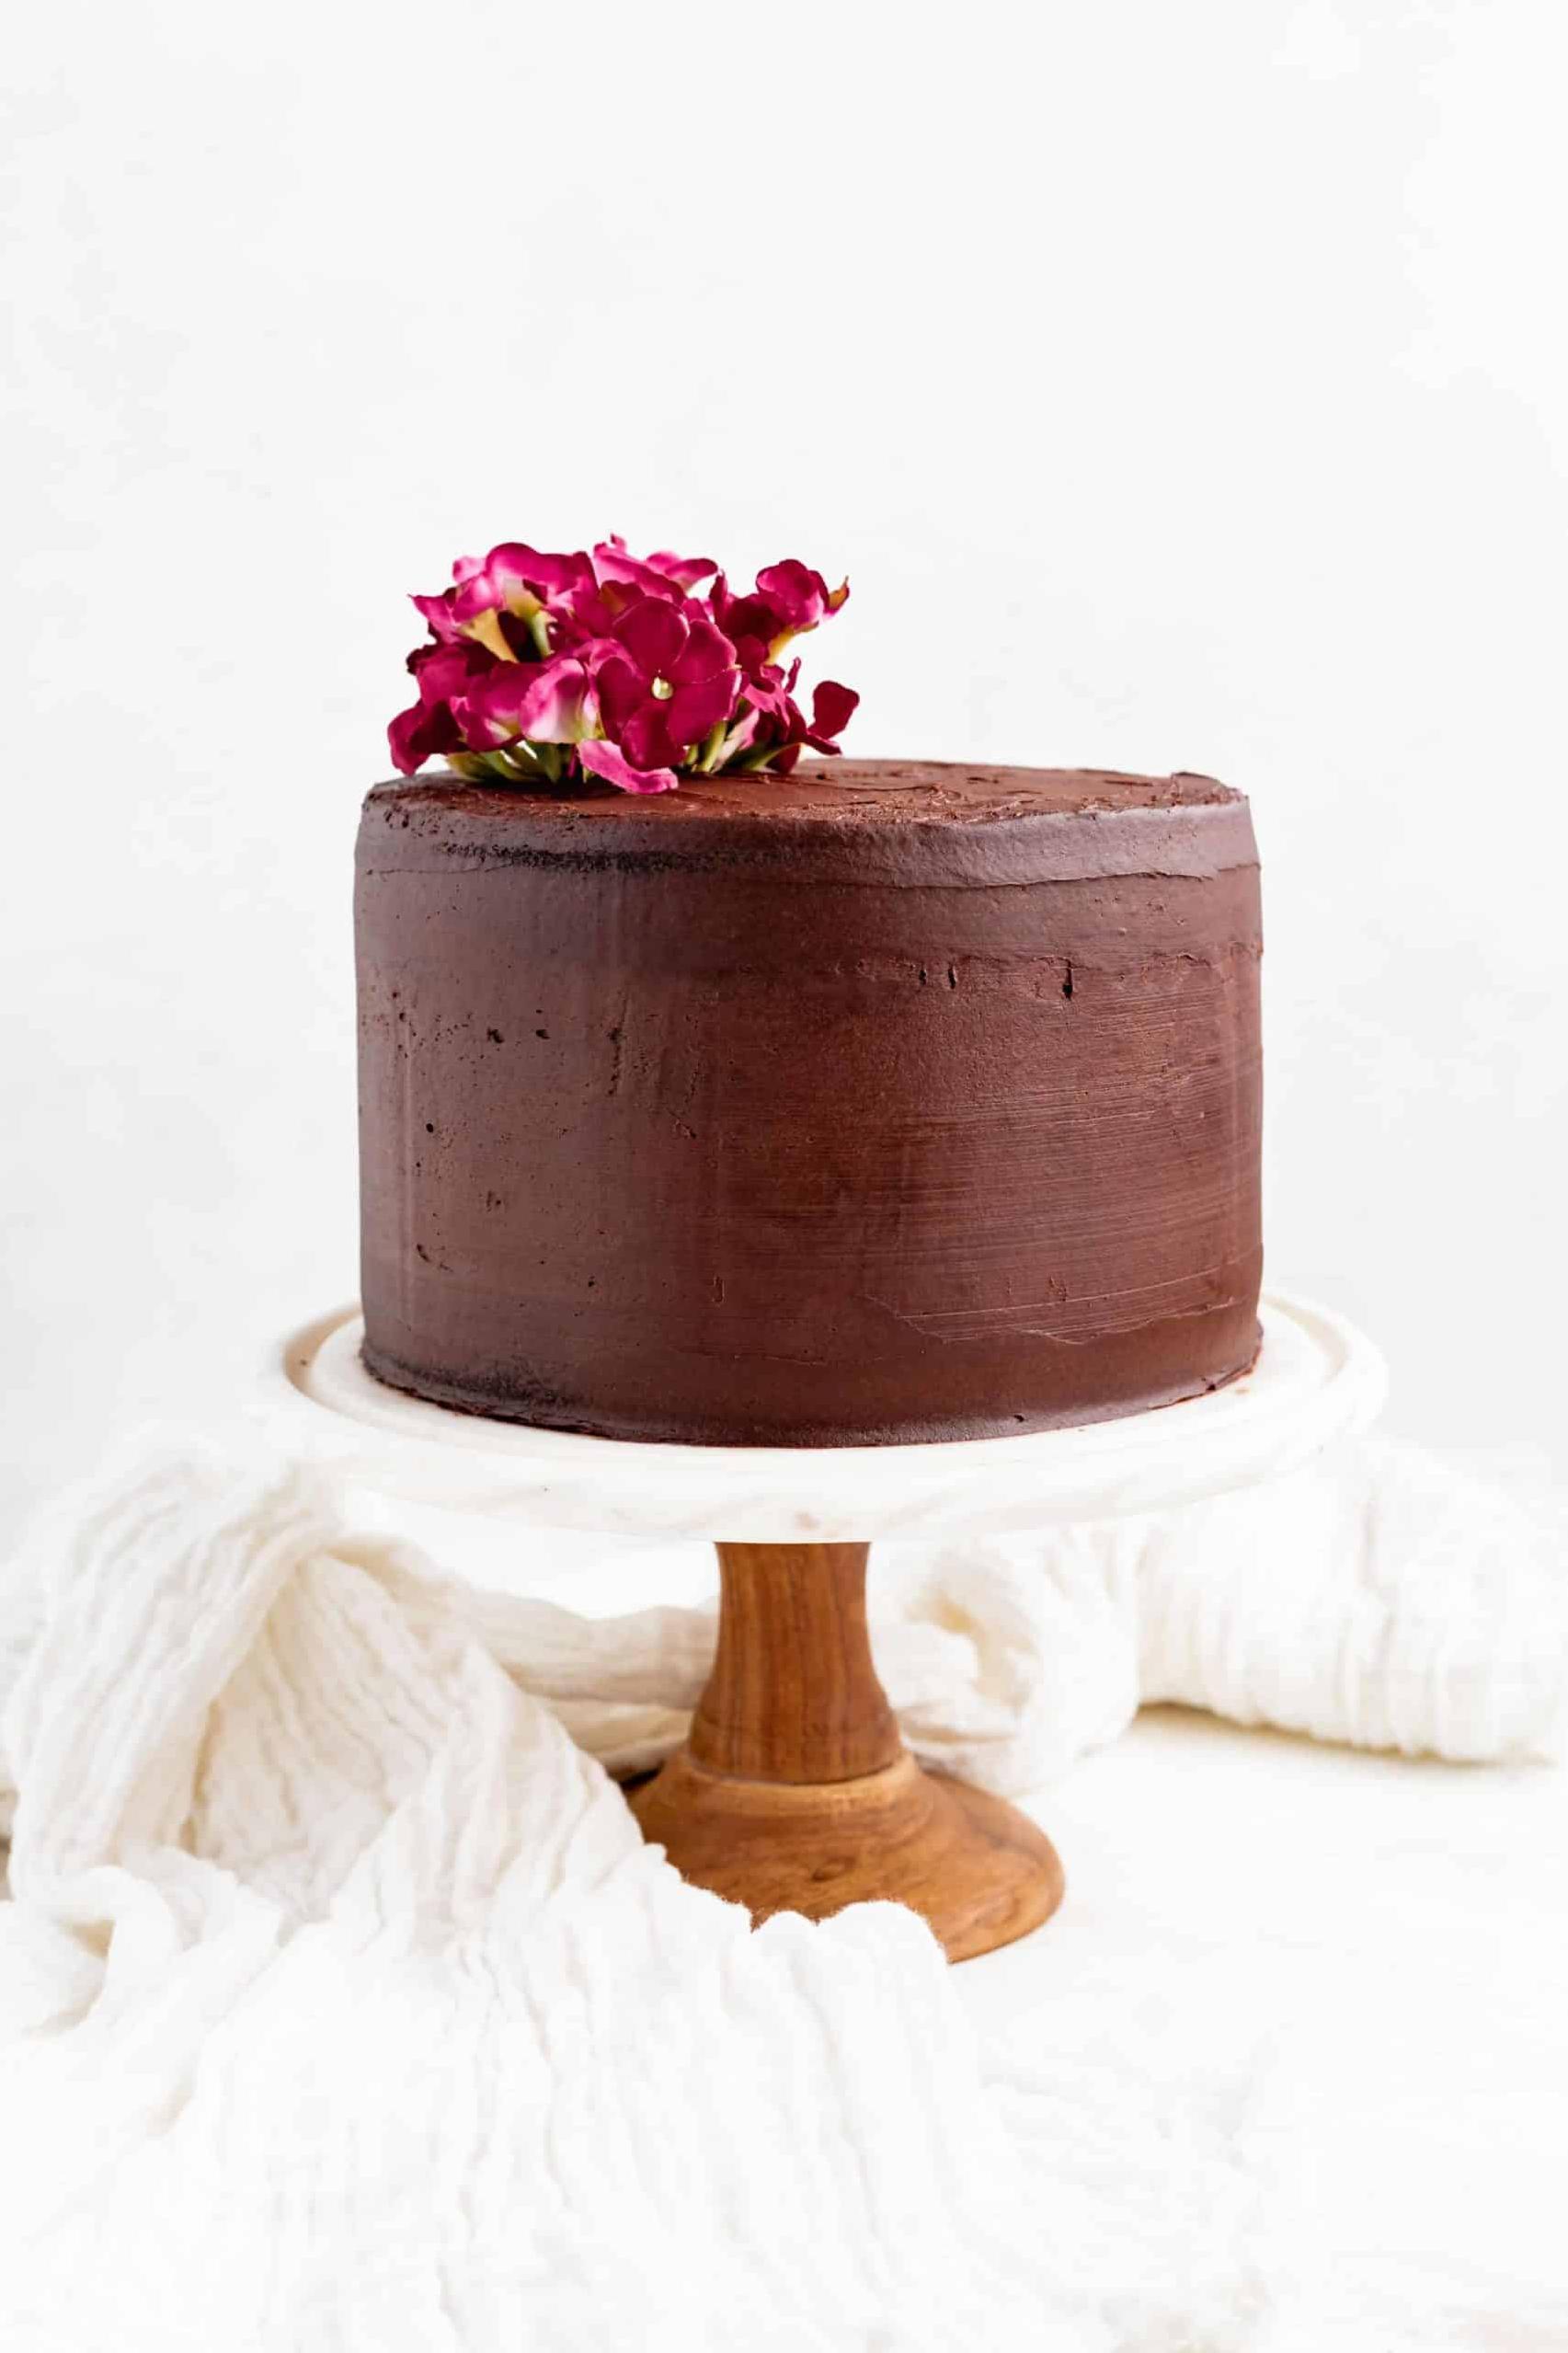  Indulge in the heaven of chocolate and wine with this decadent cake.